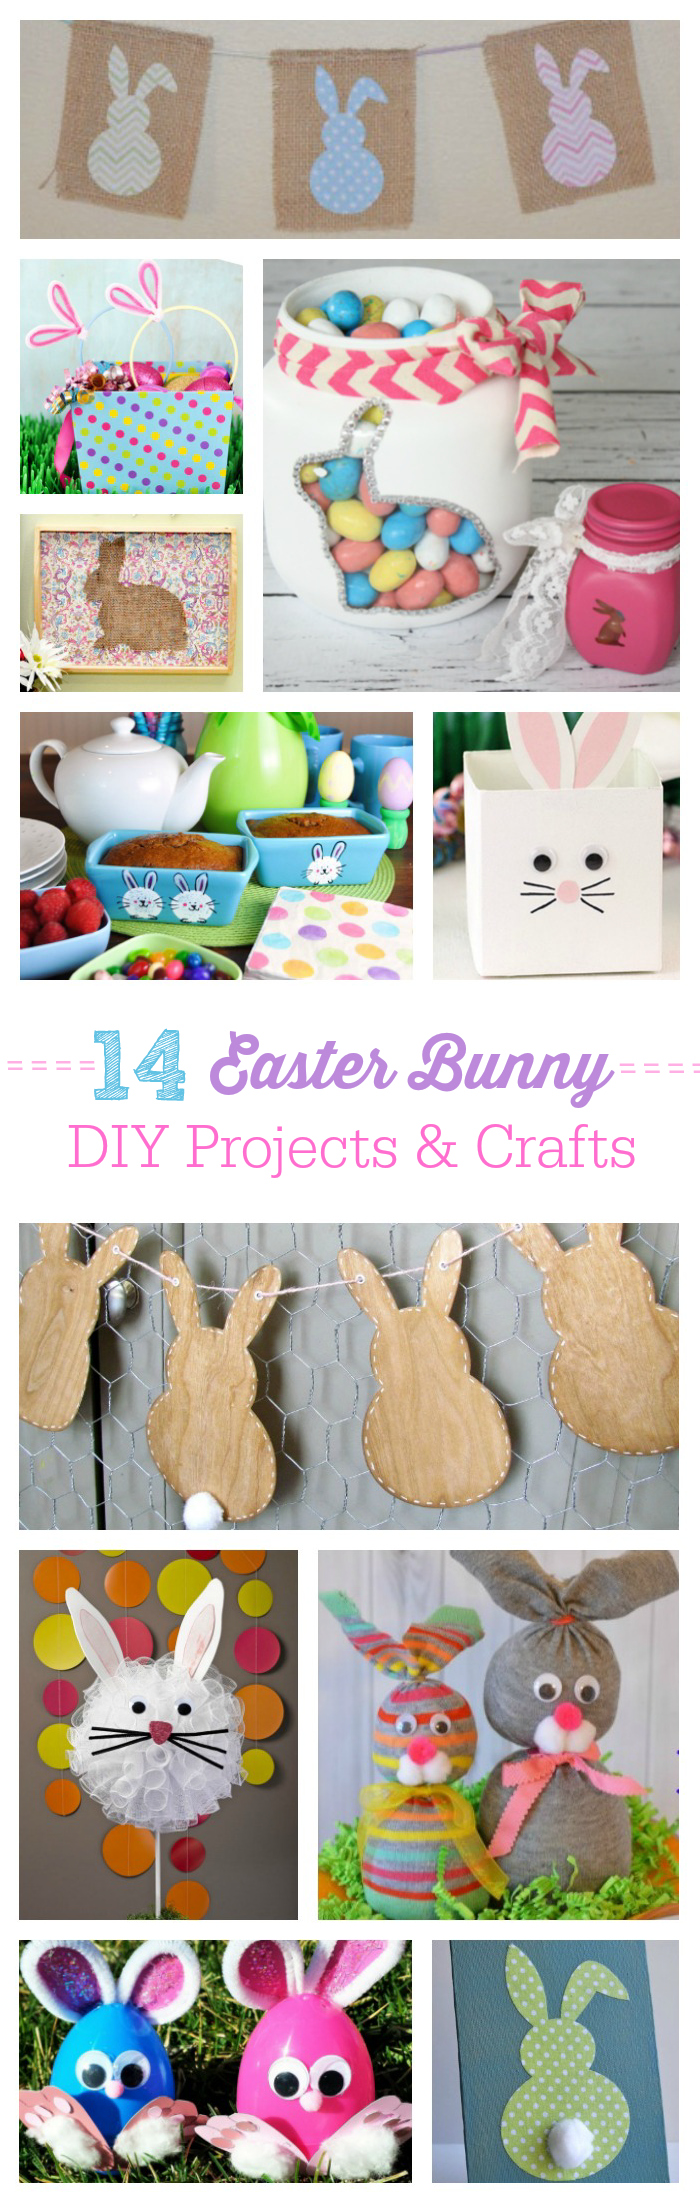 Super cute craft and diy project ideas for Easter. Who doesn't adore the Easter Bunny? 